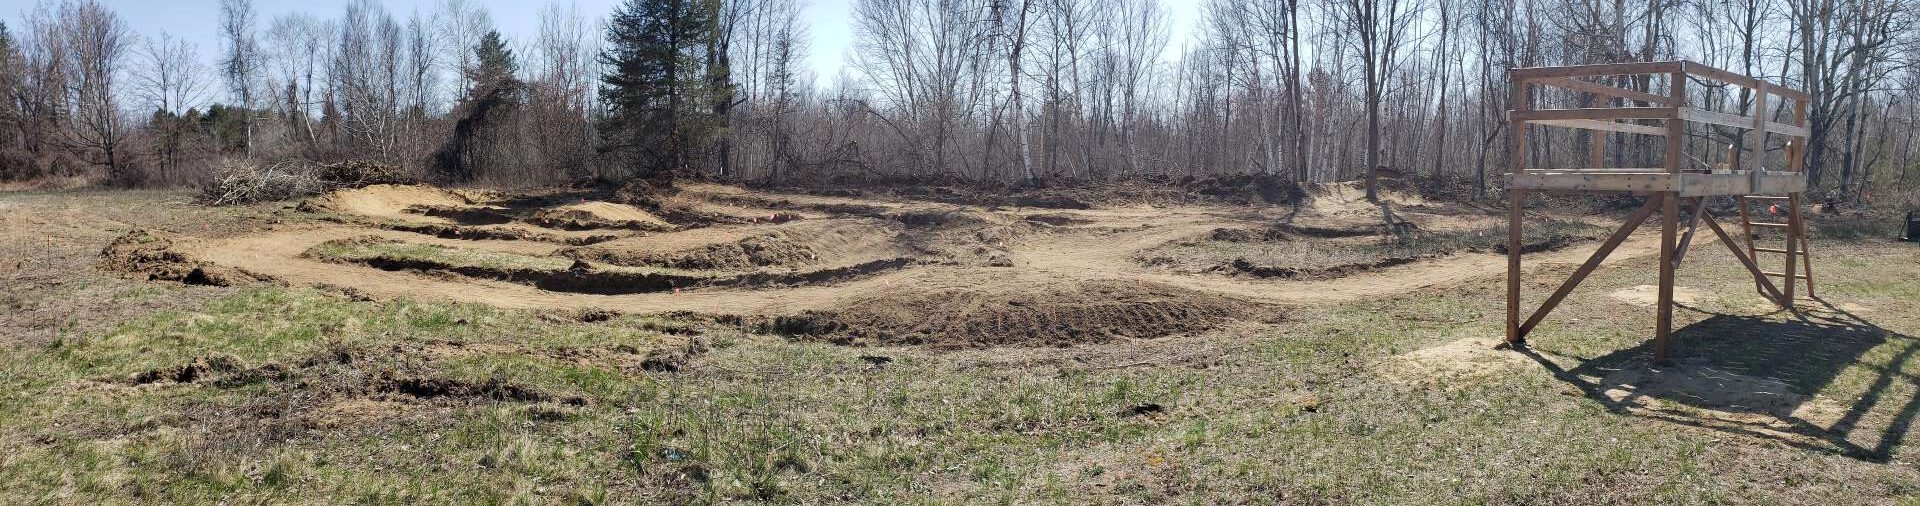 RC Dirt Race Track at the Arnprior Radio Control Club